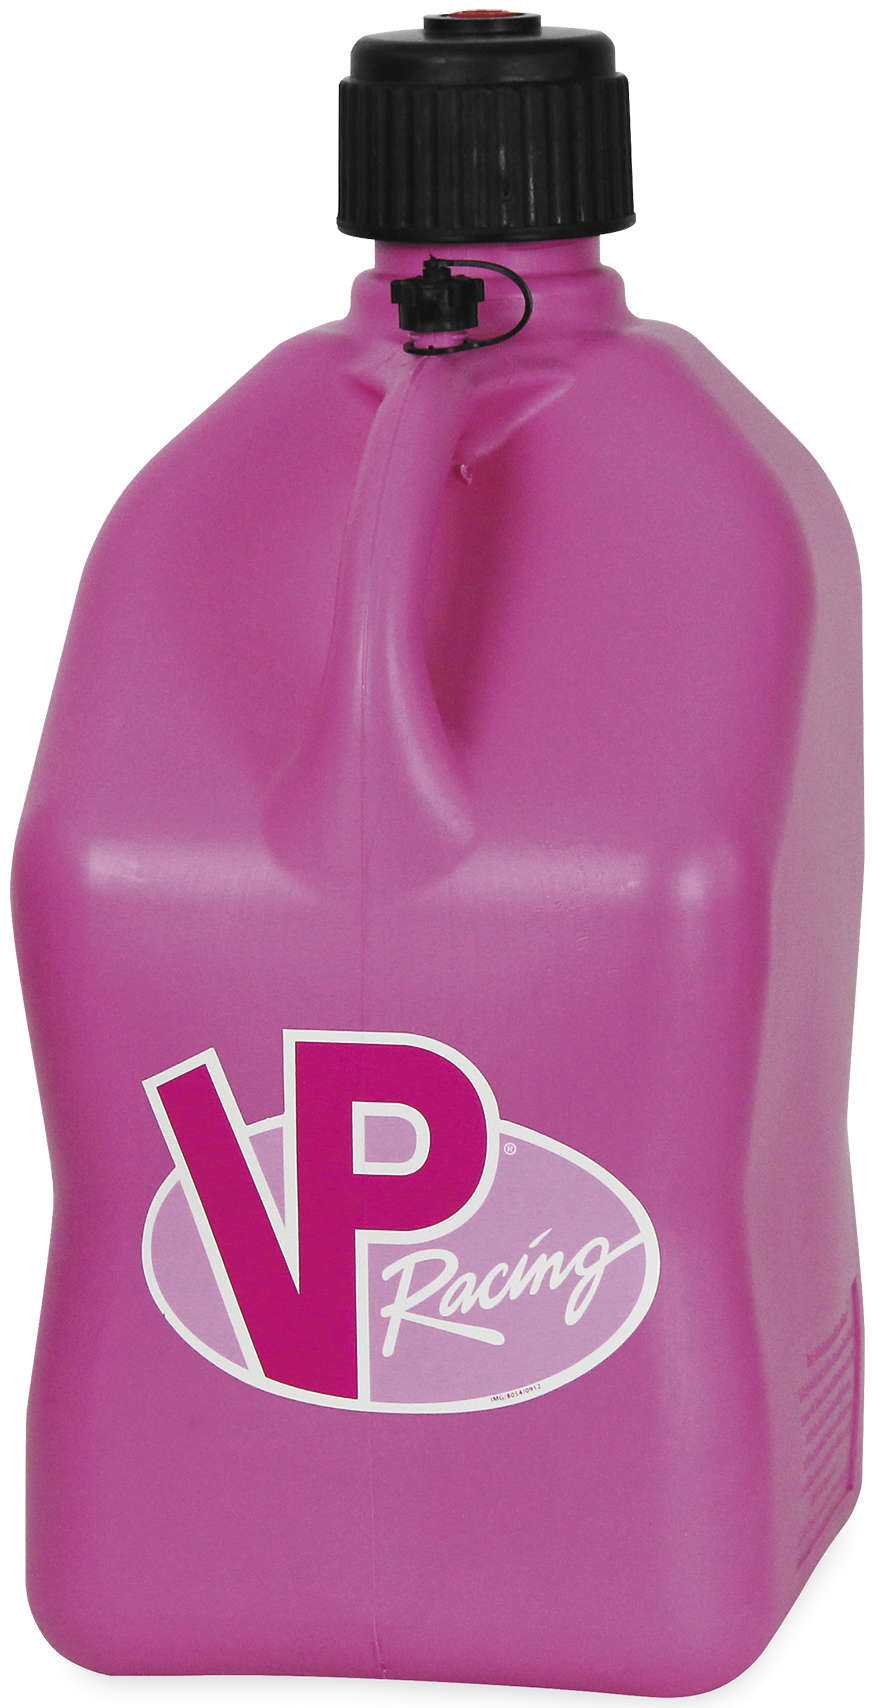 5.5 Gallon Motorsports Fluid Container - Pink Jug & Black Top - Click Image to Close